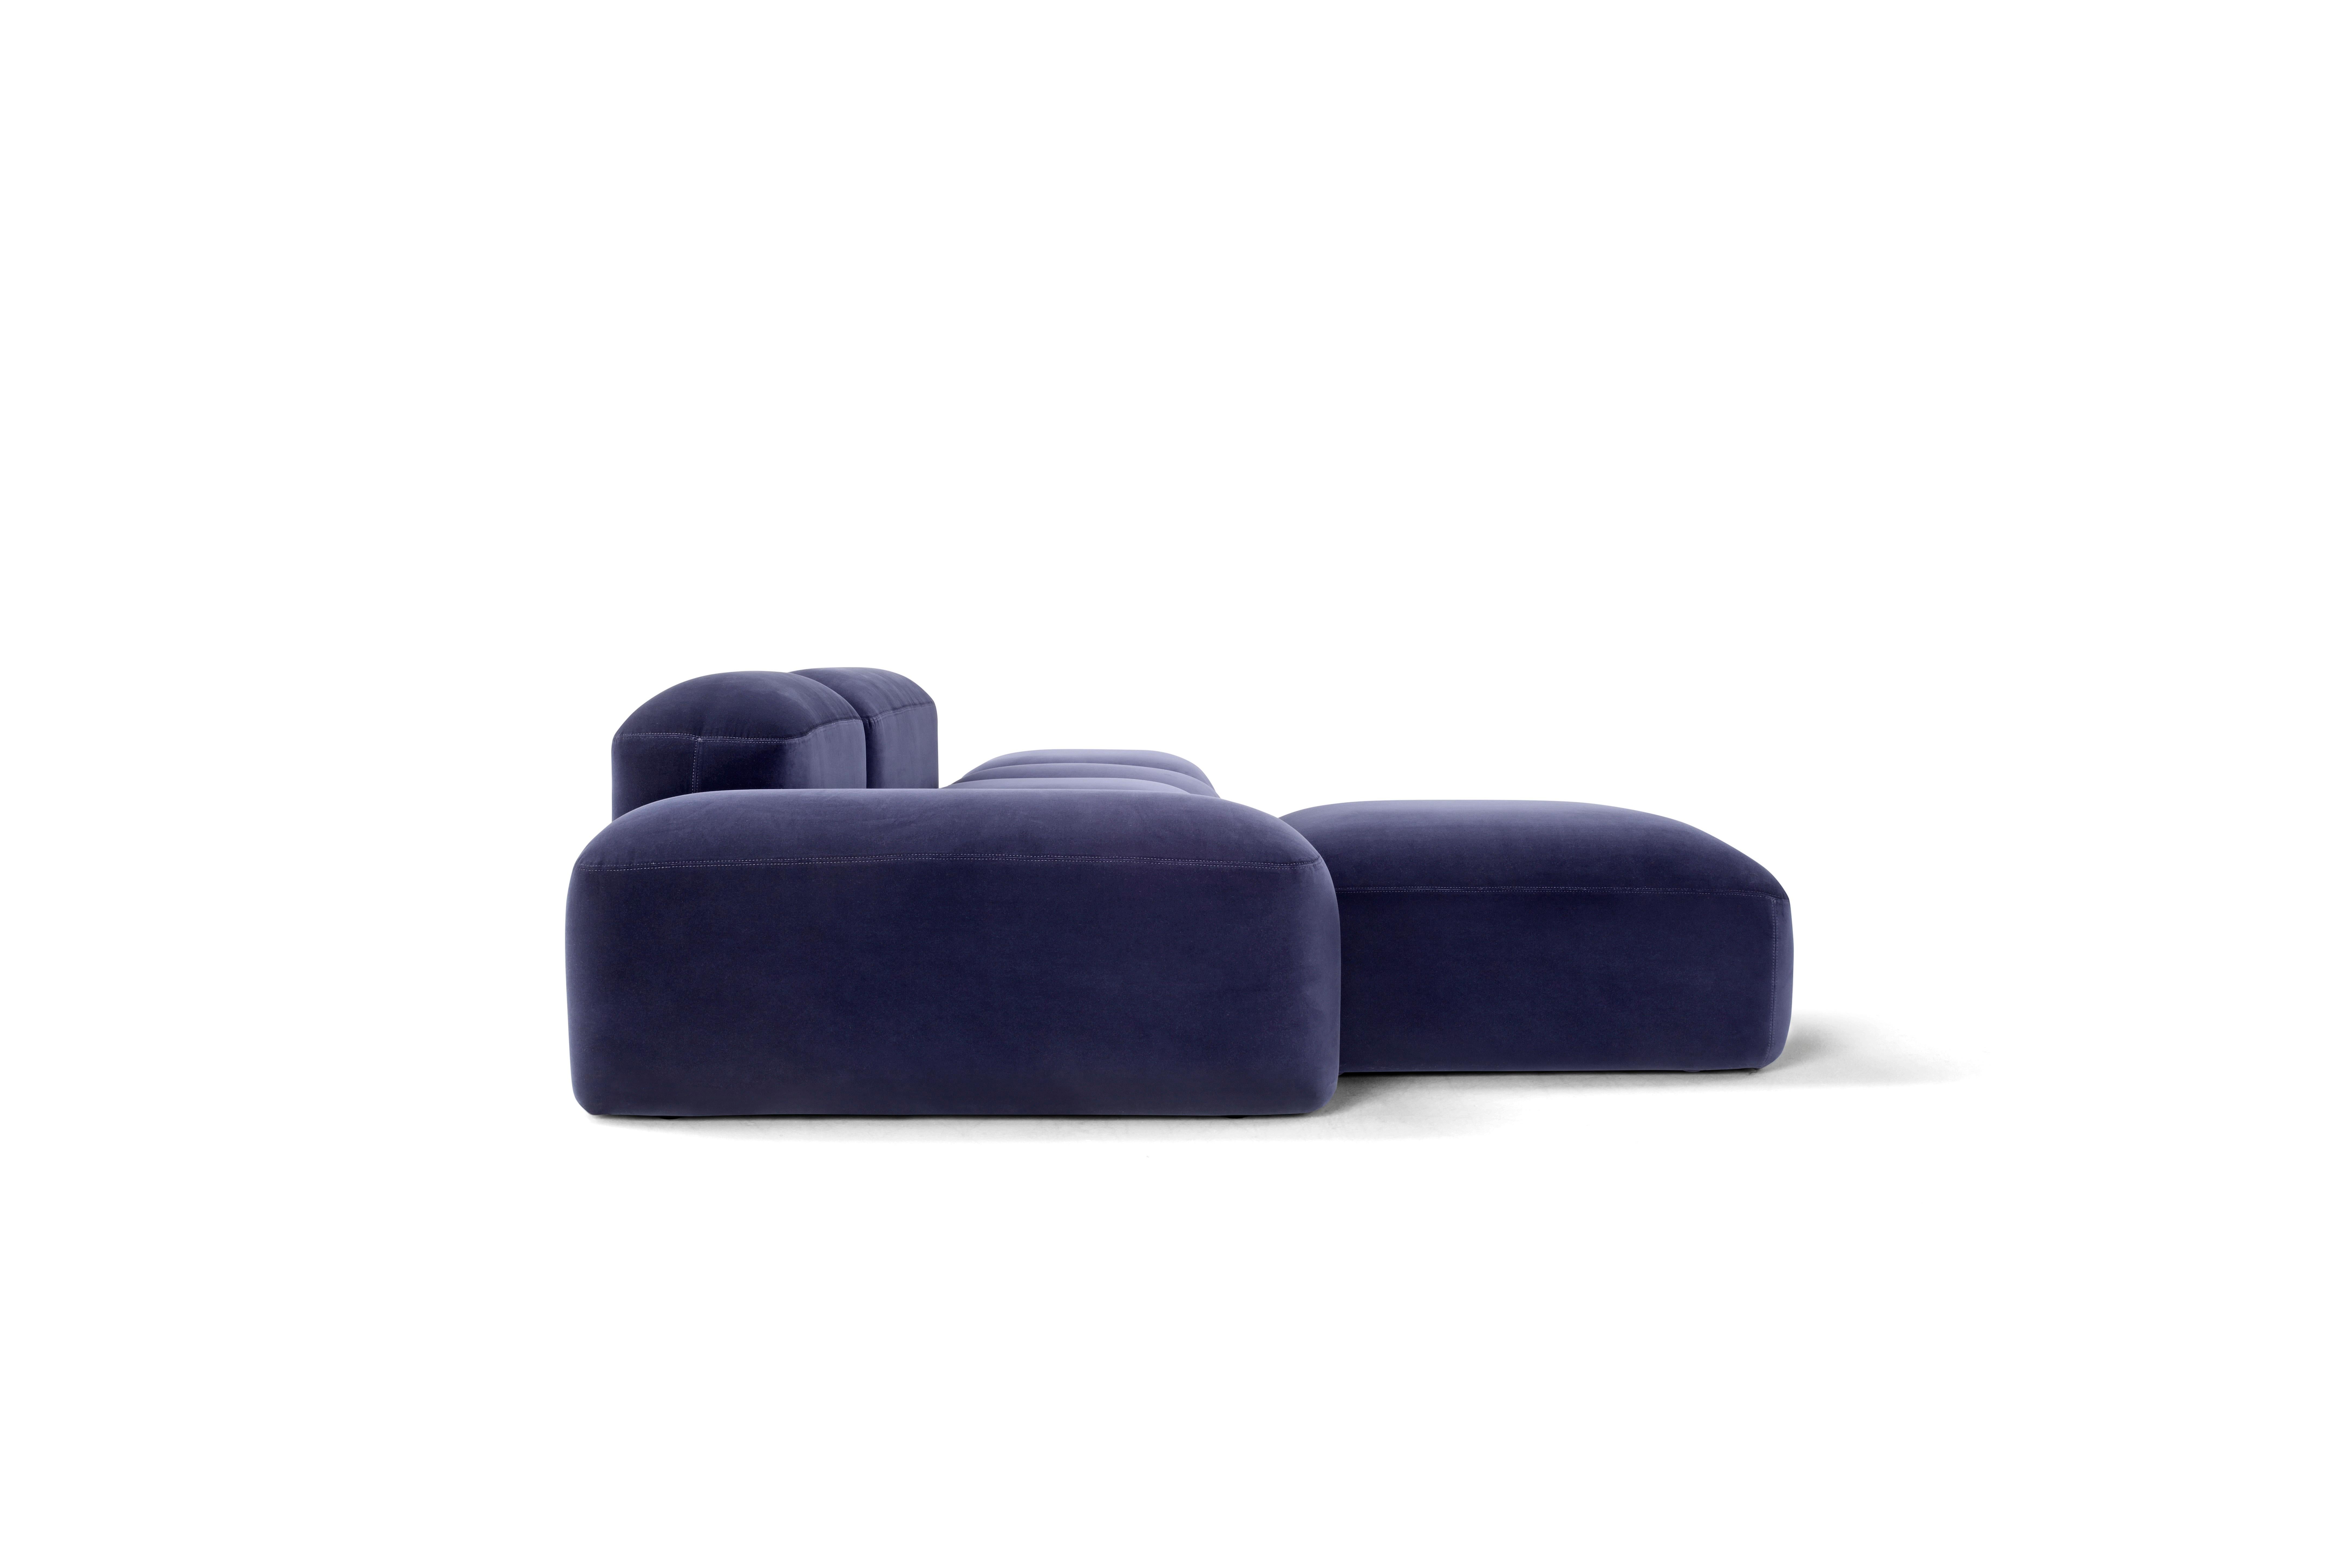 'Lapis' is a collection of sofas and seats with very organic and Minimalist shapes.
Designer: Emanuel Gargano
Maker: Amura Lab 

'Lapis' can be made in several dimension and combinations, according to spaces and needs: from the most Classic and